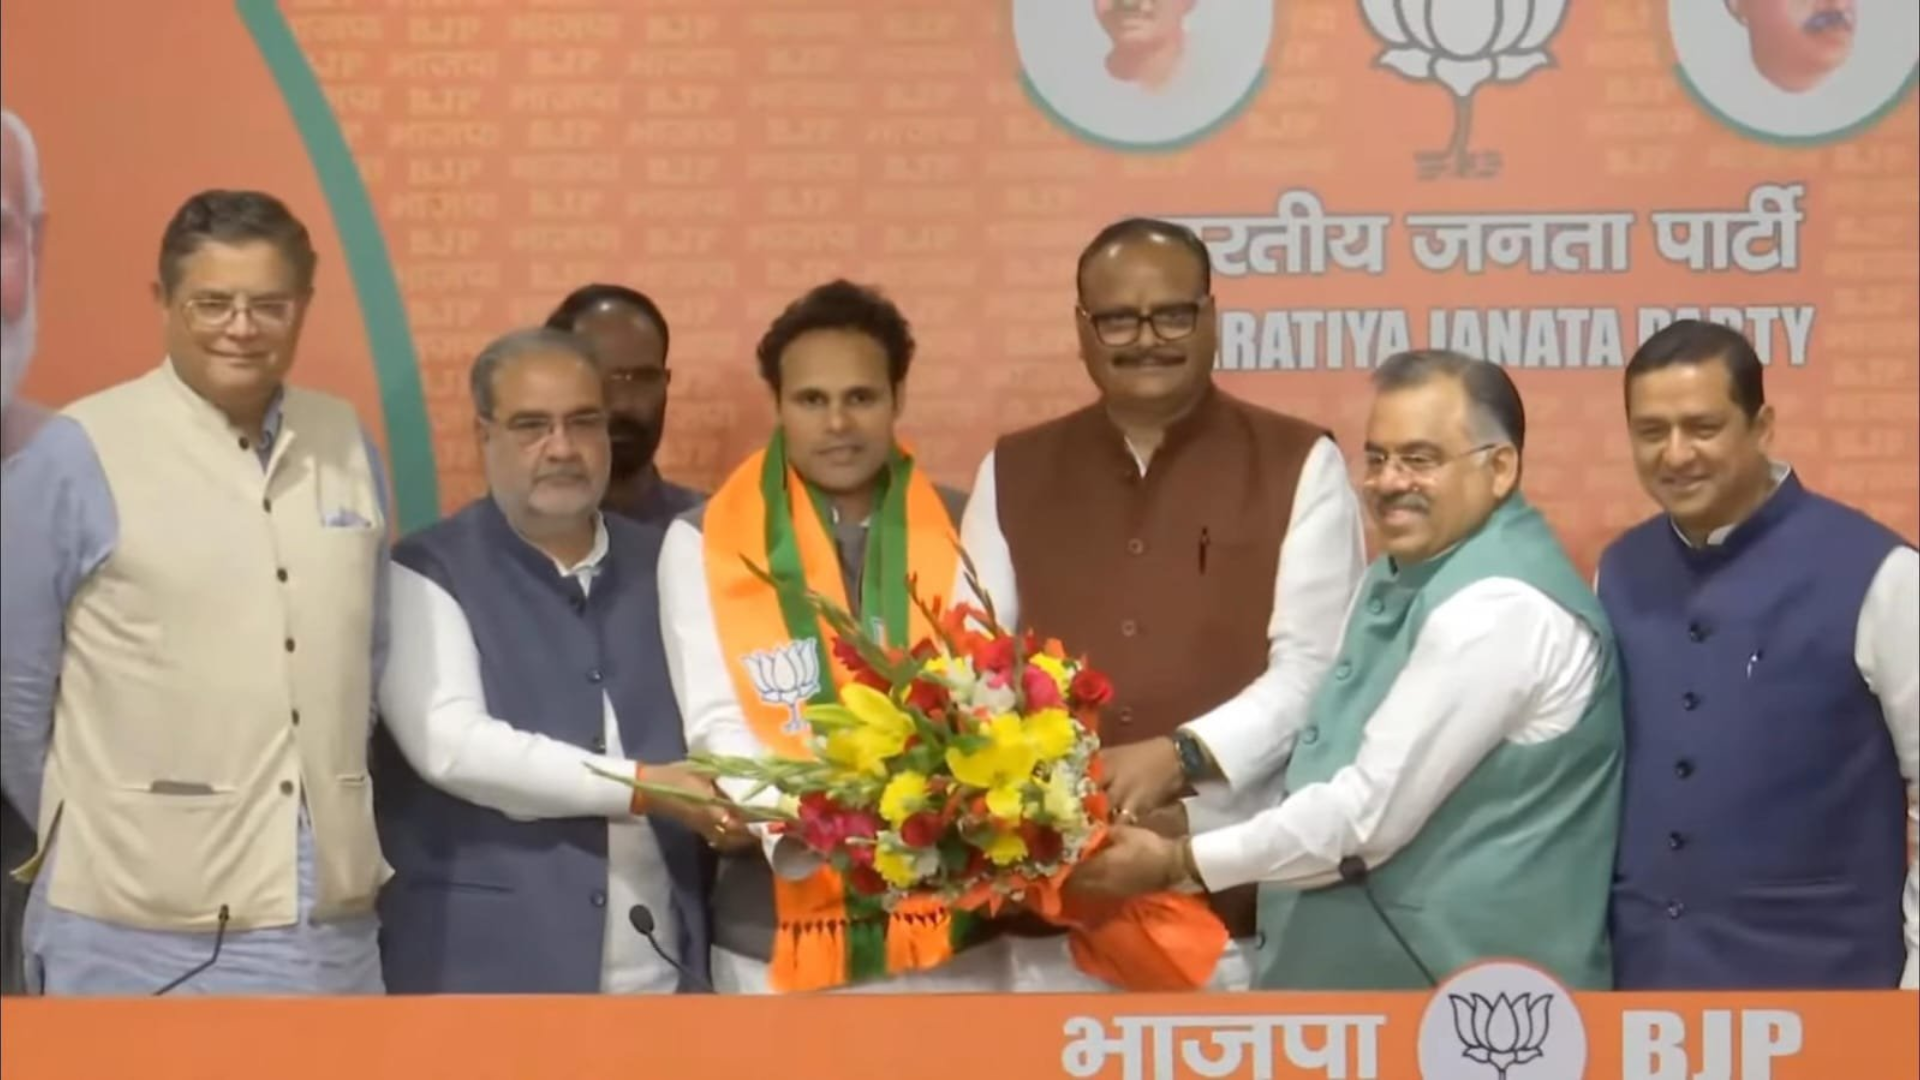 BSP MP Ritesh Pandey Quits Party, Joins the BJP